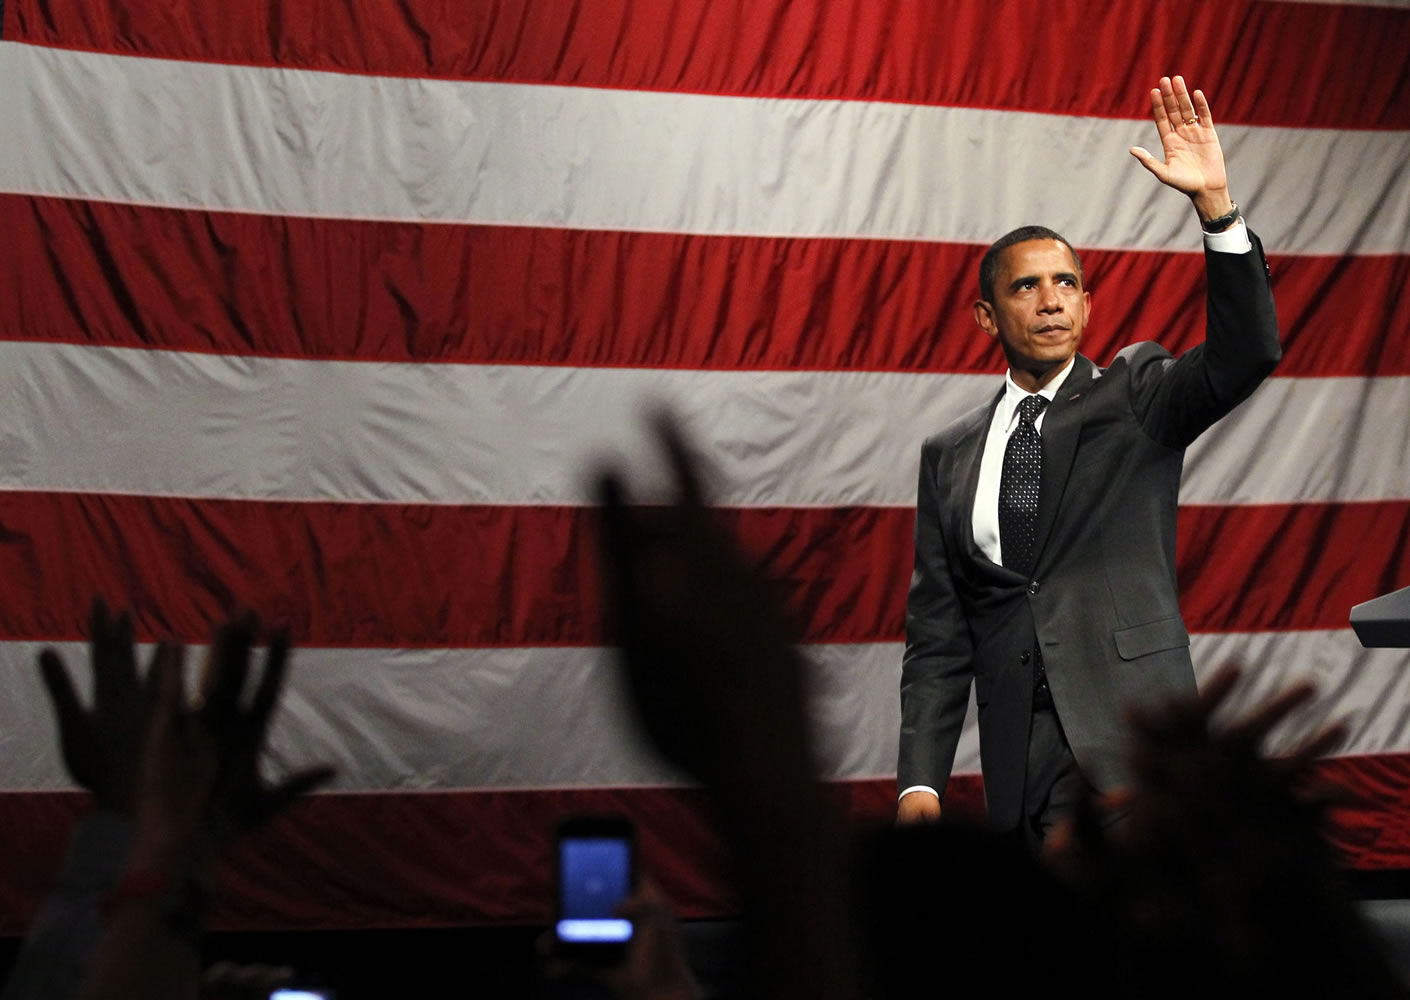 President Barack Obama waves after a fundraiser at the House of Blues on Monday in West Hollywood, Calif.